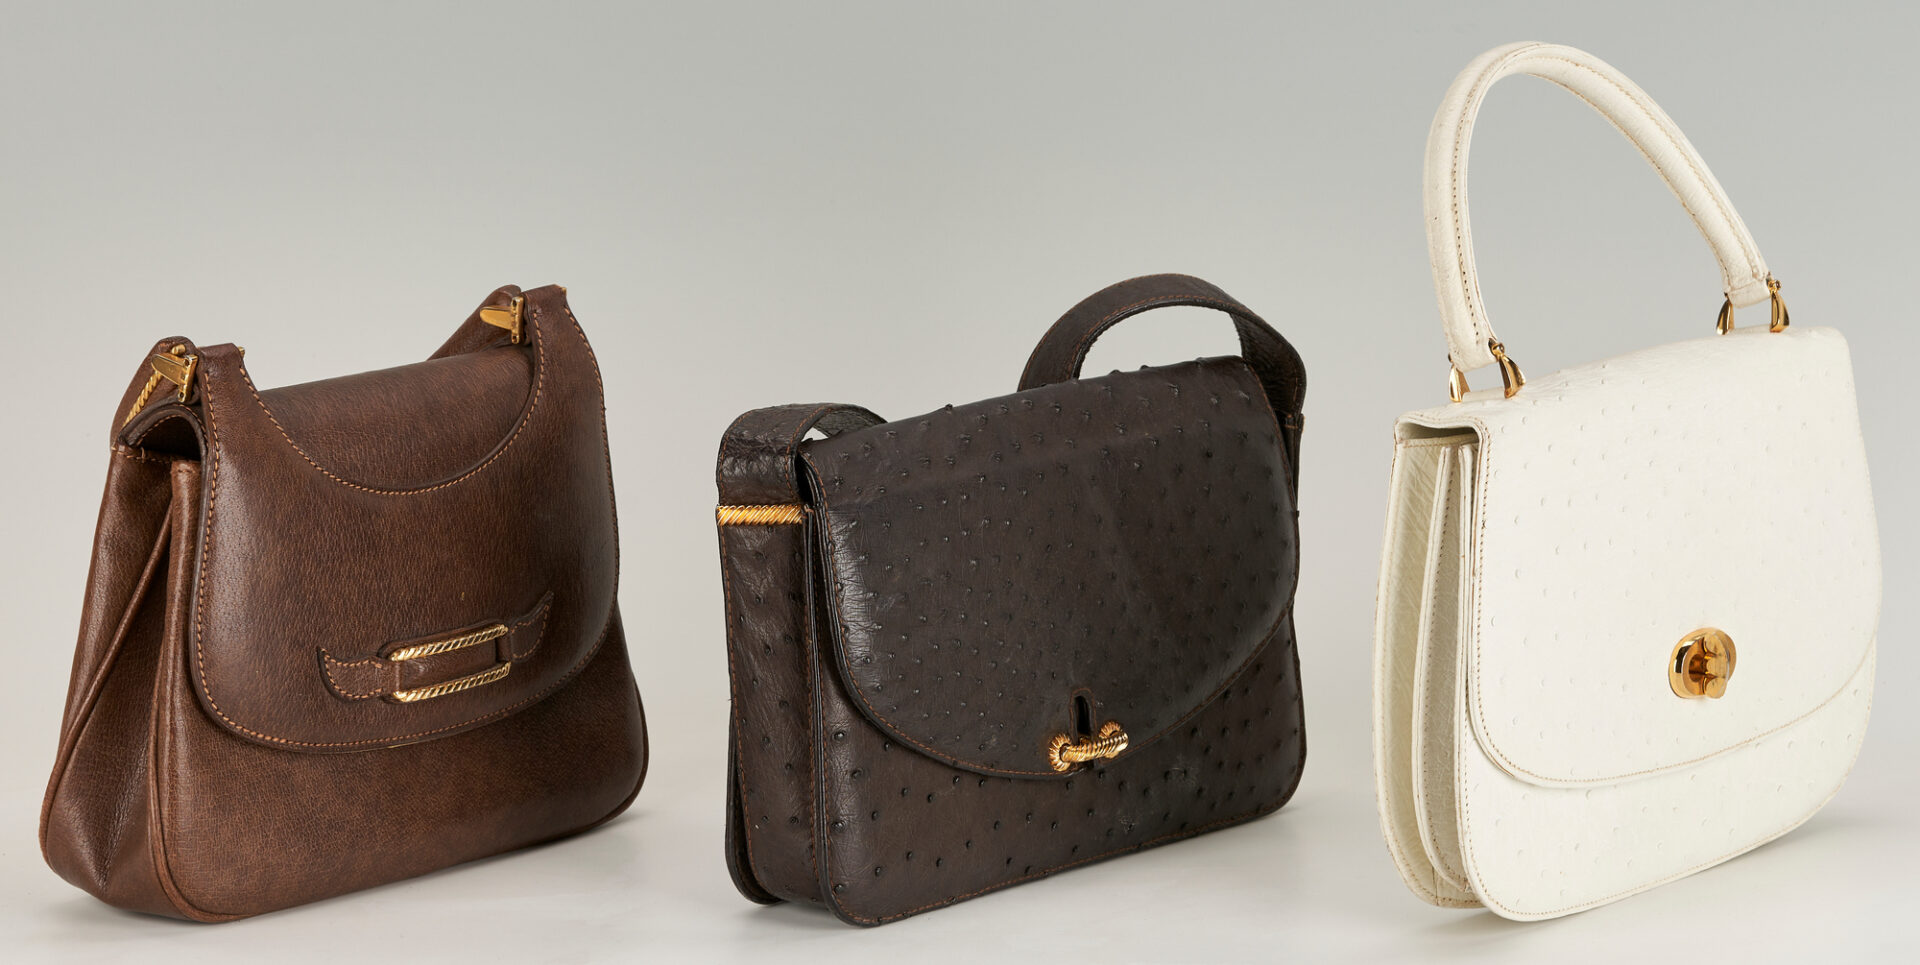 Lot 749: 3 Gucci Handbags, including Ostrich, Leather